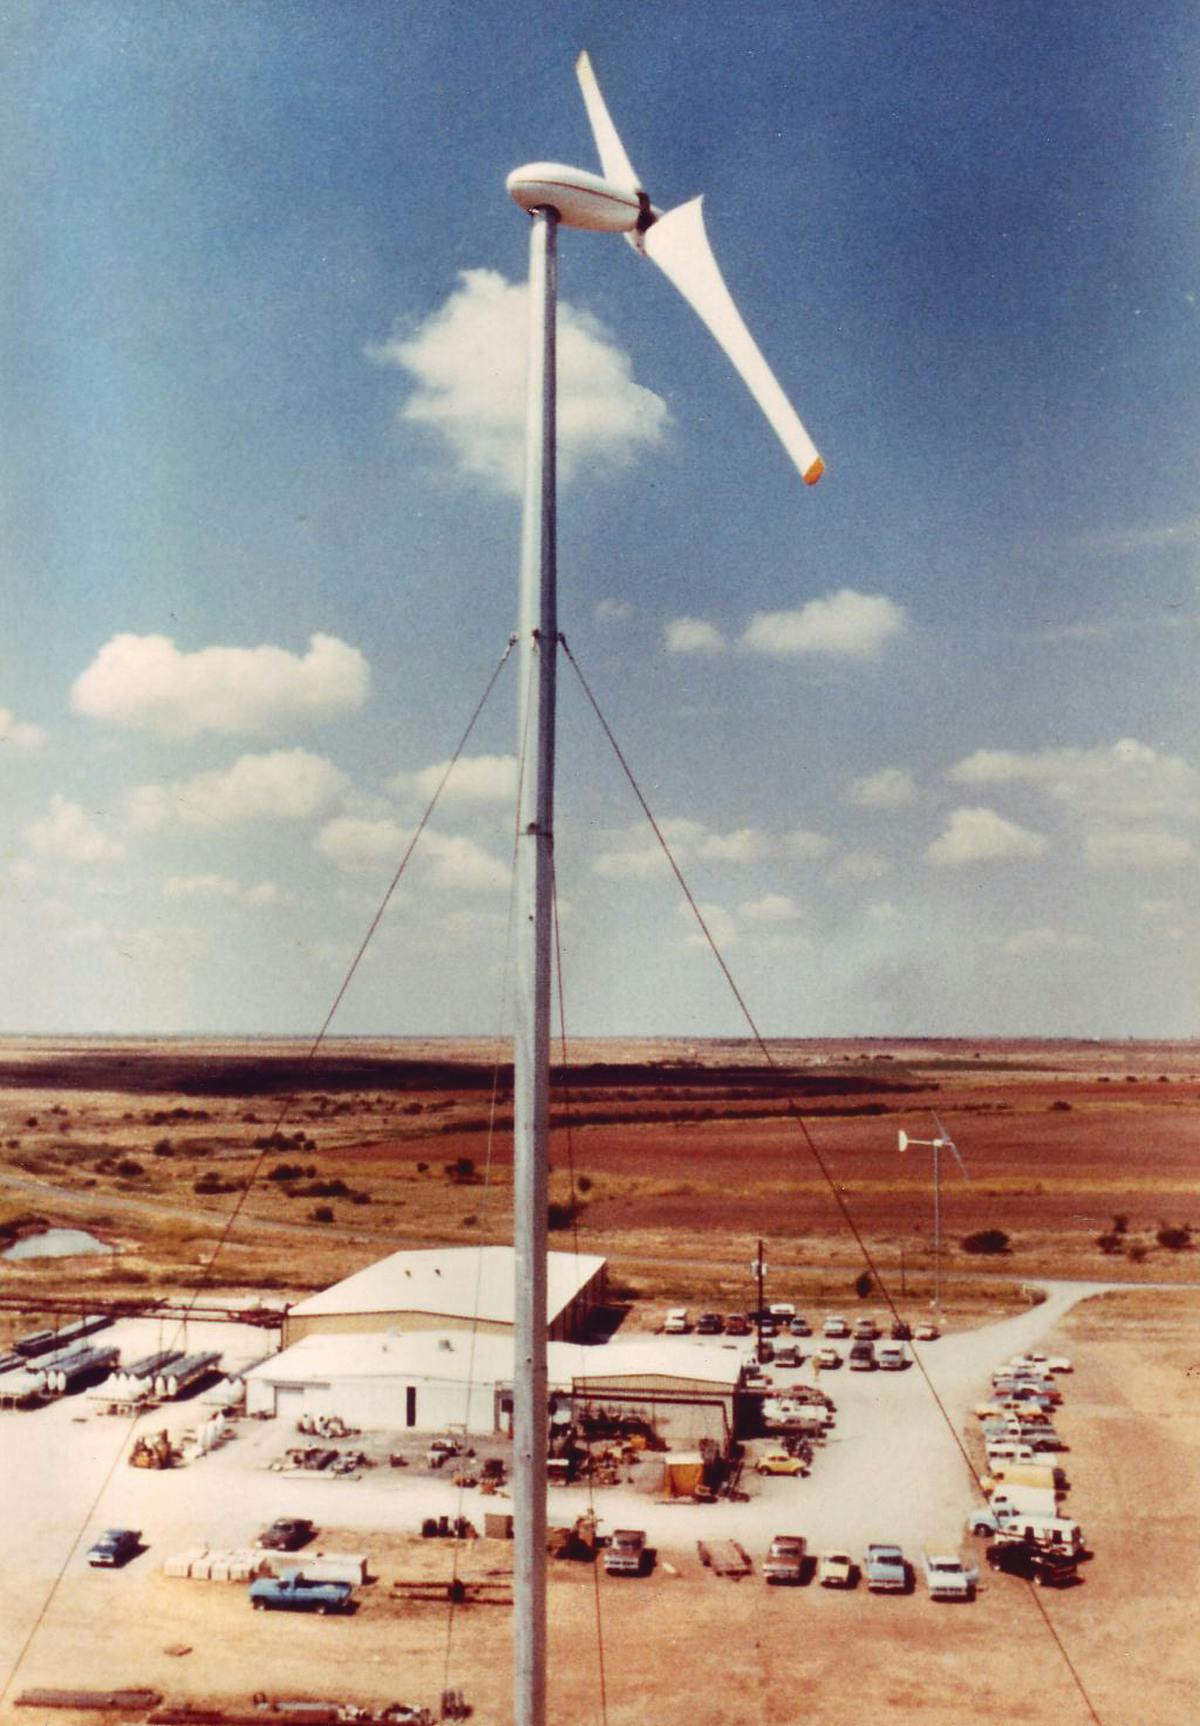 A prototype turbine built by Carter Wind Systems stands over the company's Burkburnett manufacturing plant, circa 1982.